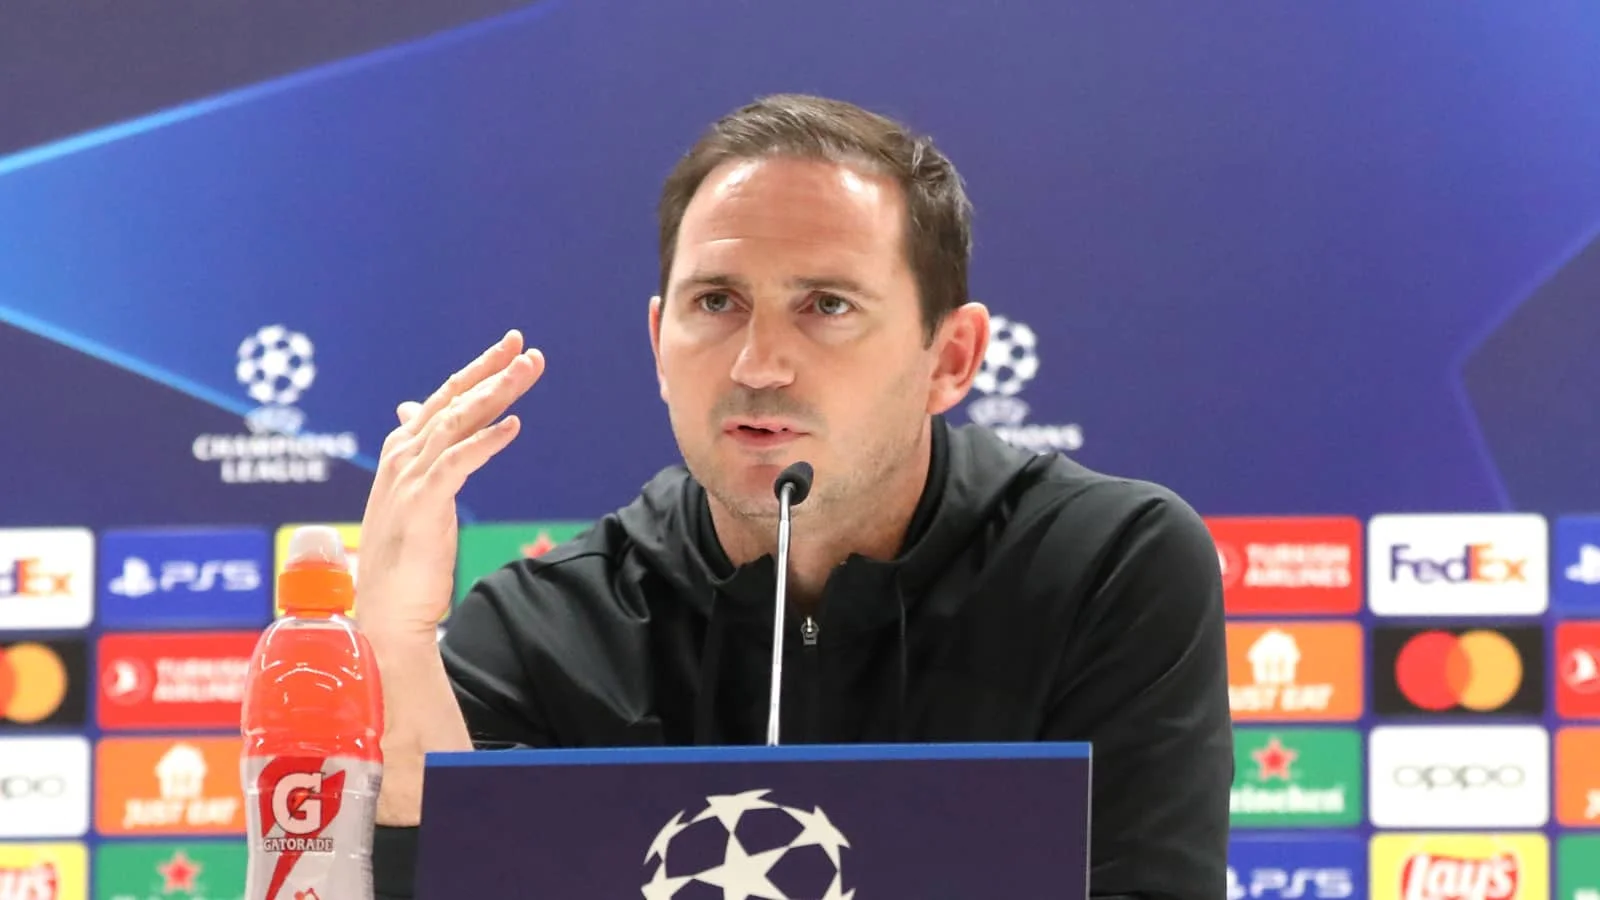 FA Cup: I feel for him – Lampard singles out Chelsea star after exit